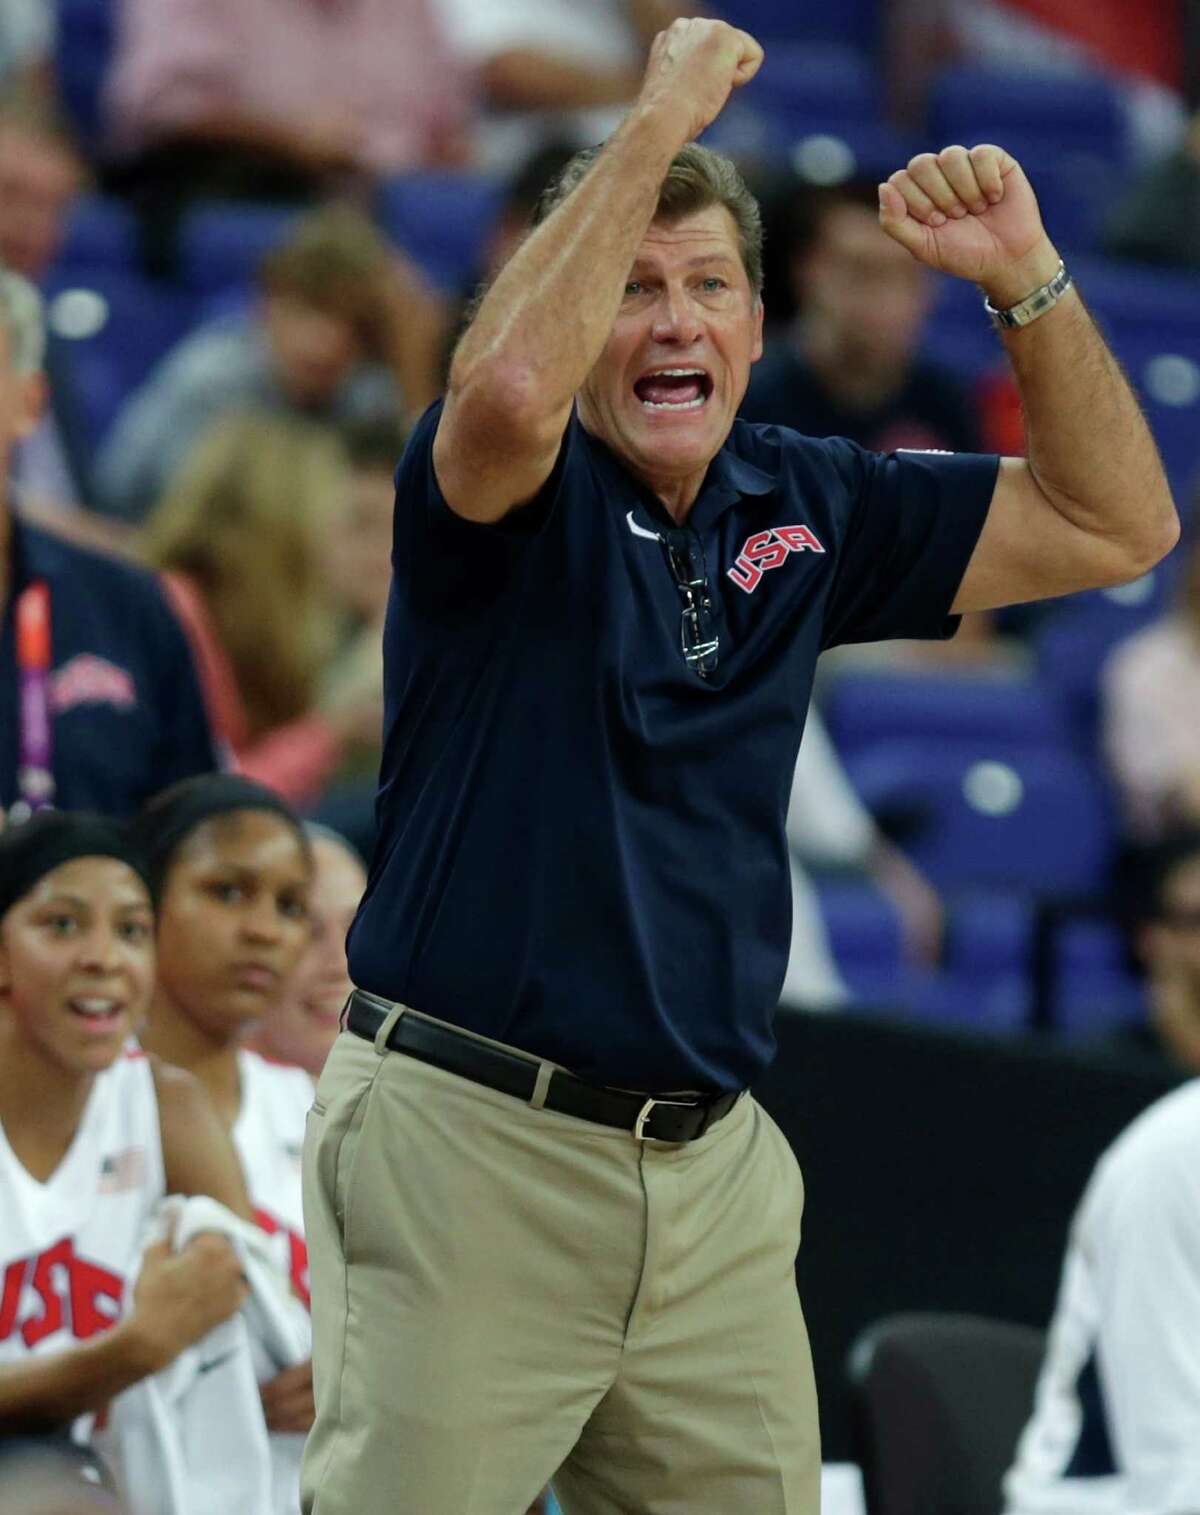 United States' head coach Geno Auriemma gestures towards his player during the women's gold medal basketball game against France at the 2012 Summer Olympics, Saturday, Aug. 11, 2012, in London. (AP Photo/Charles Krupa)